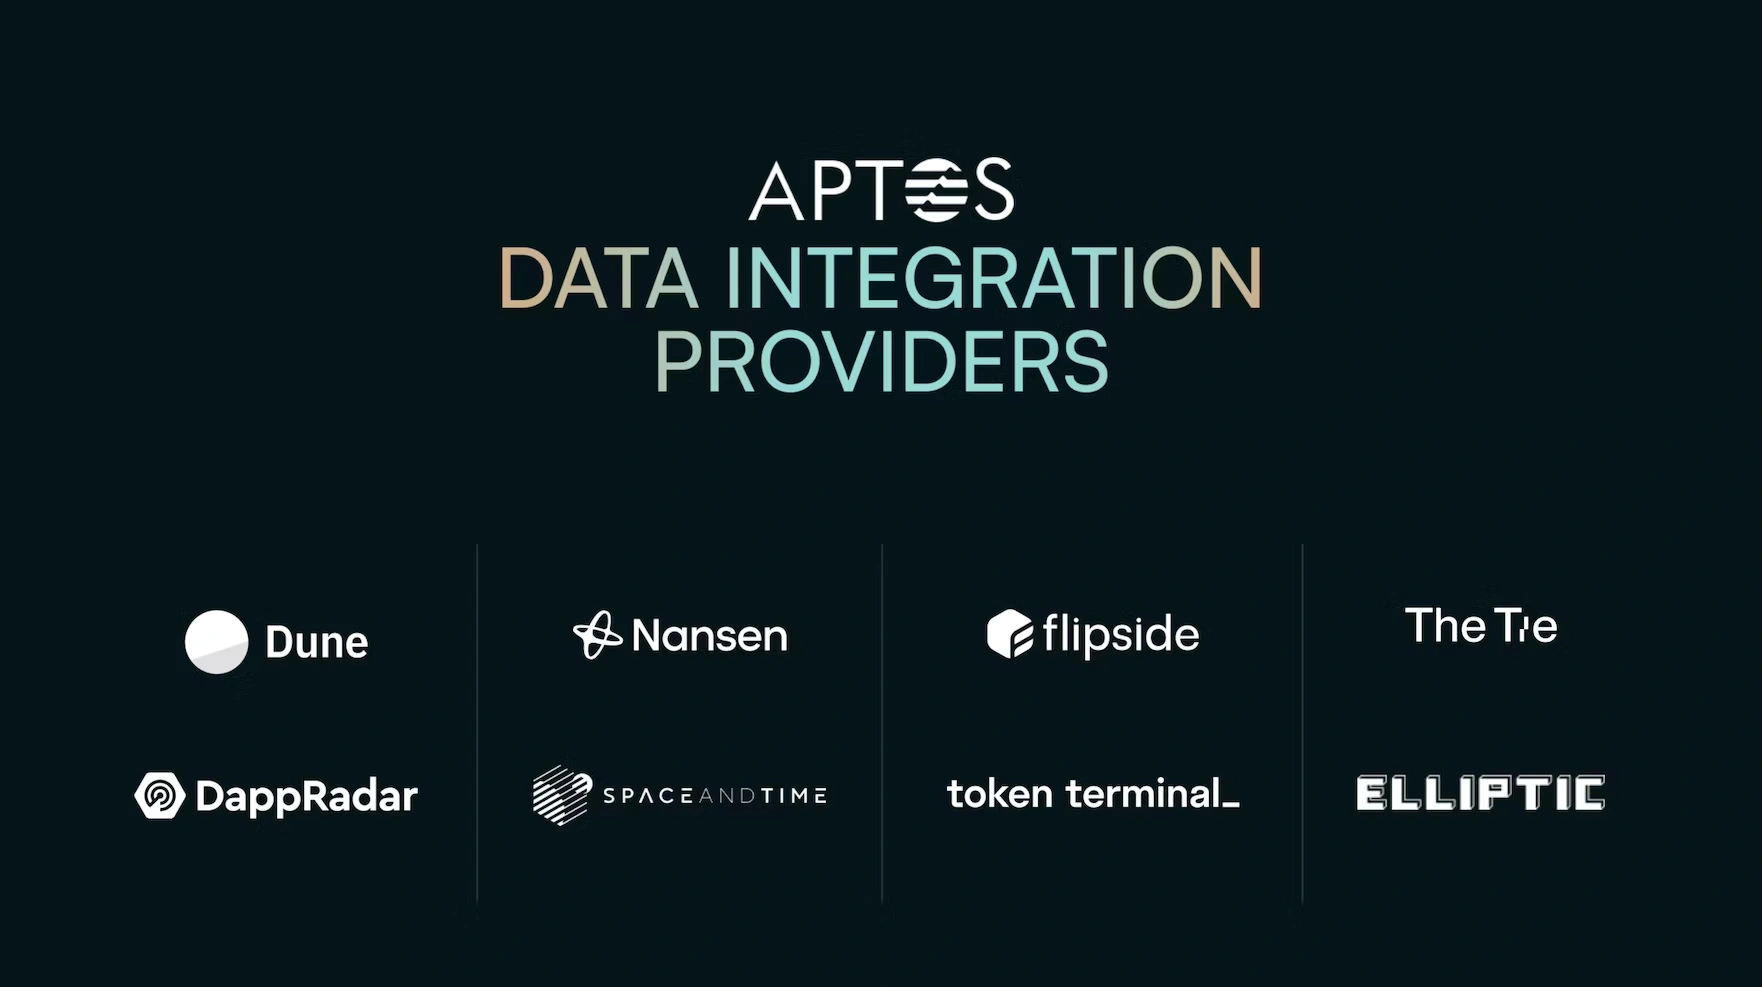 Aptos' on-chain data integration to Dune, Nansen and other top data providers